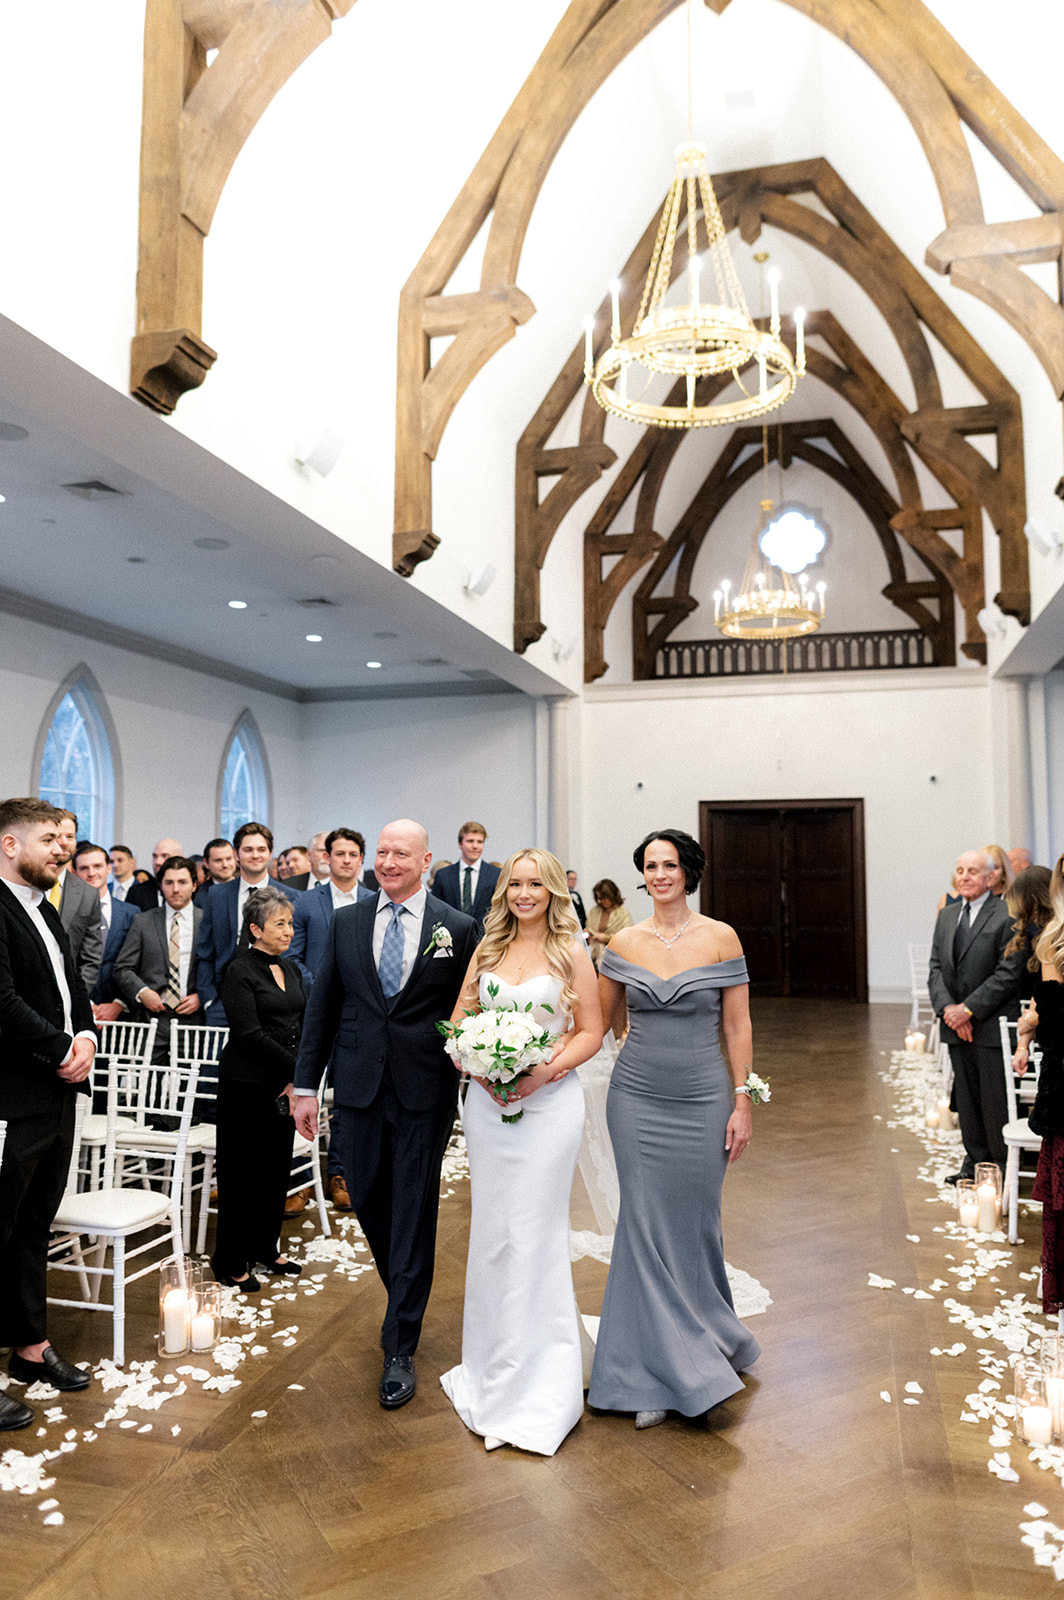 Wedding ceremony at Park Chateau chapel